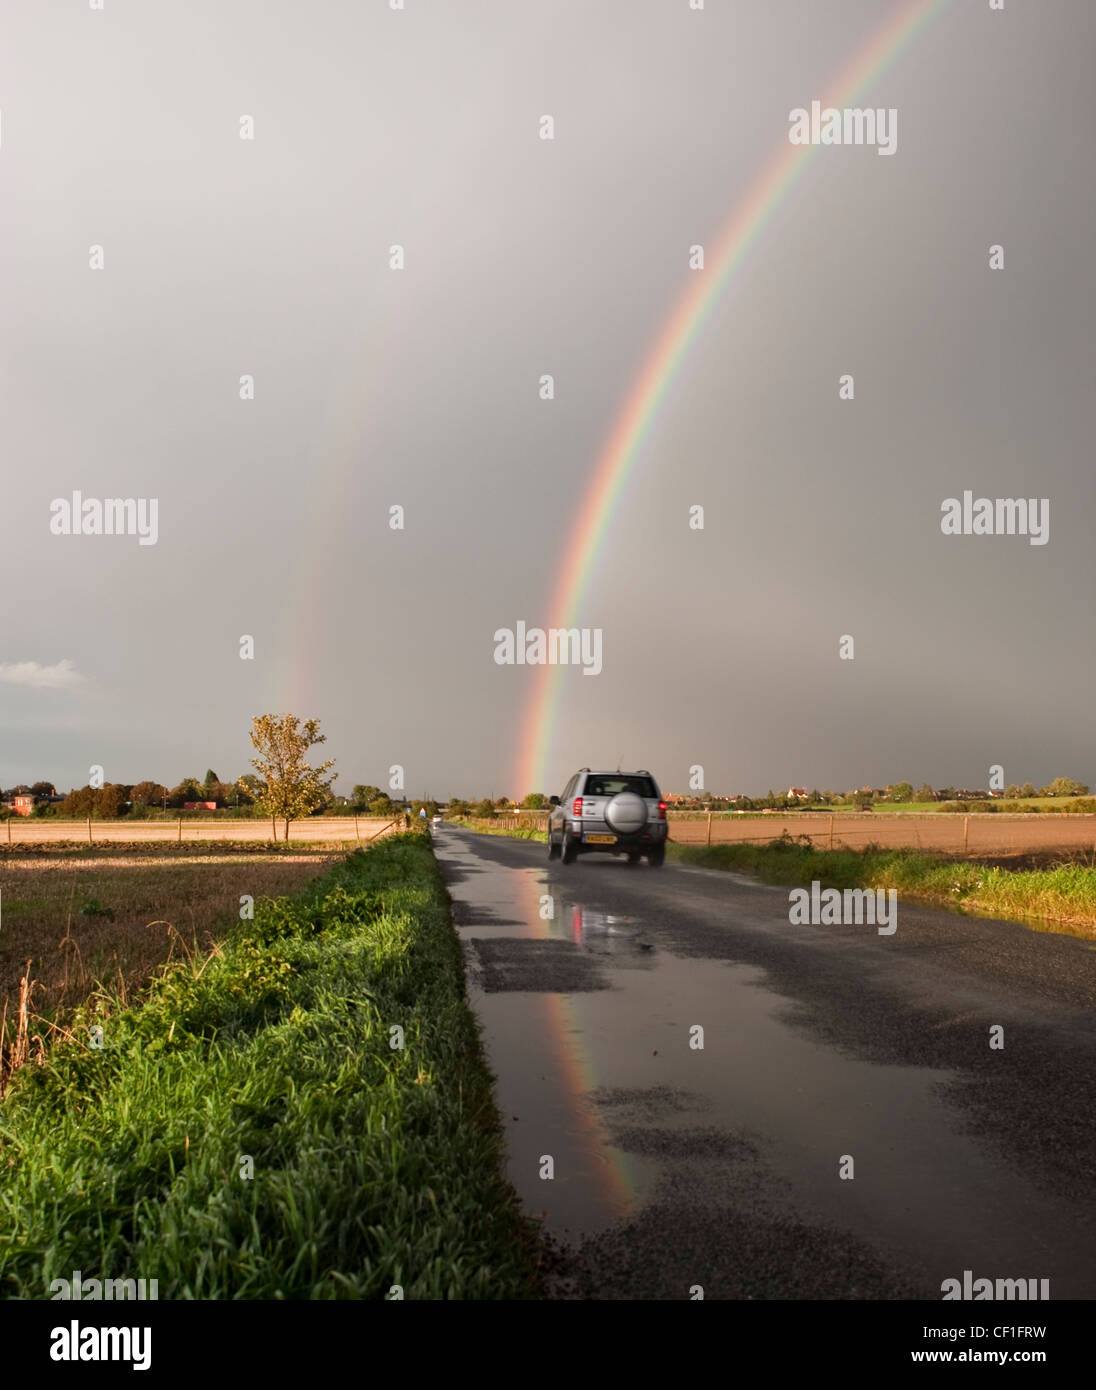 Car driving down road with double rainbow Stock Photo